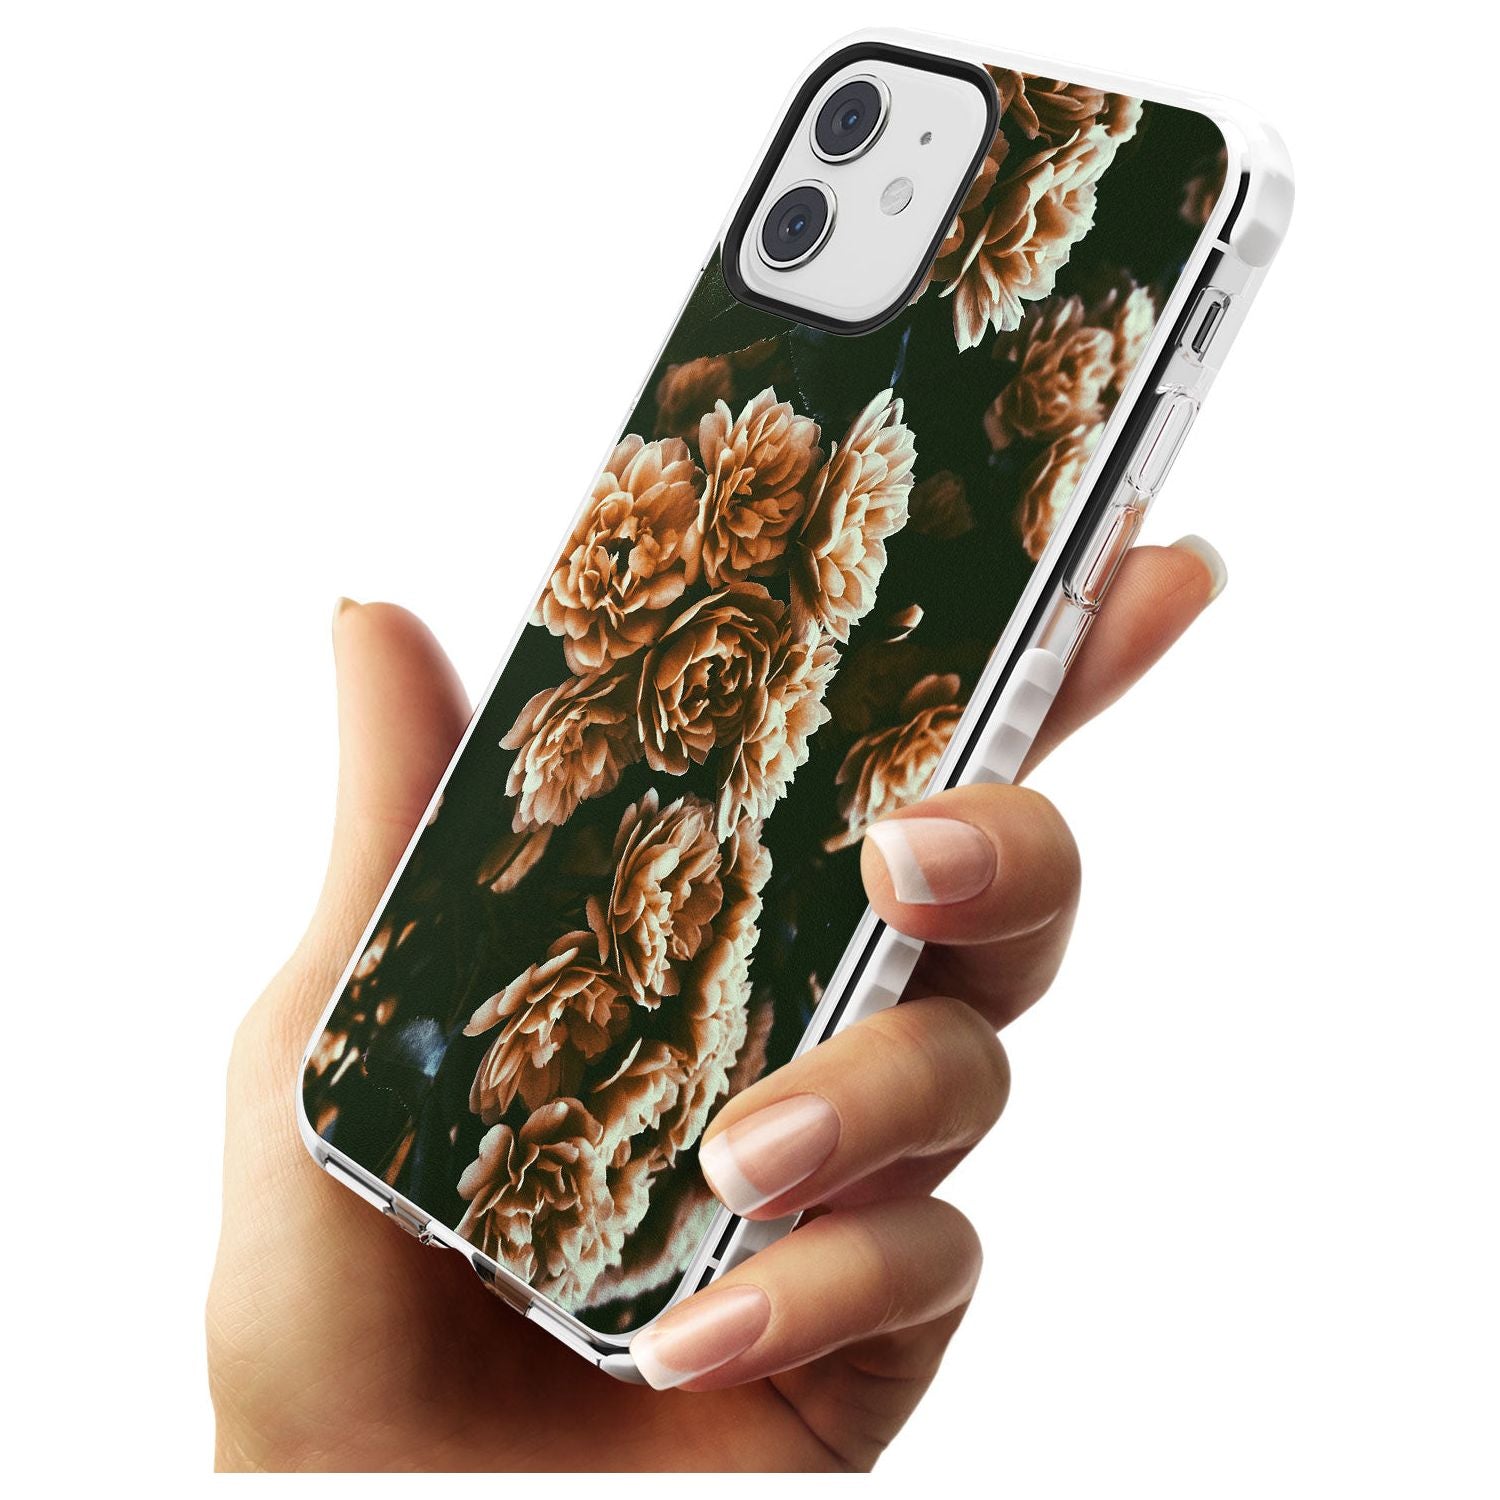 White Peonies - Real Floral Photographs Impact Phone Case for iPhone 11